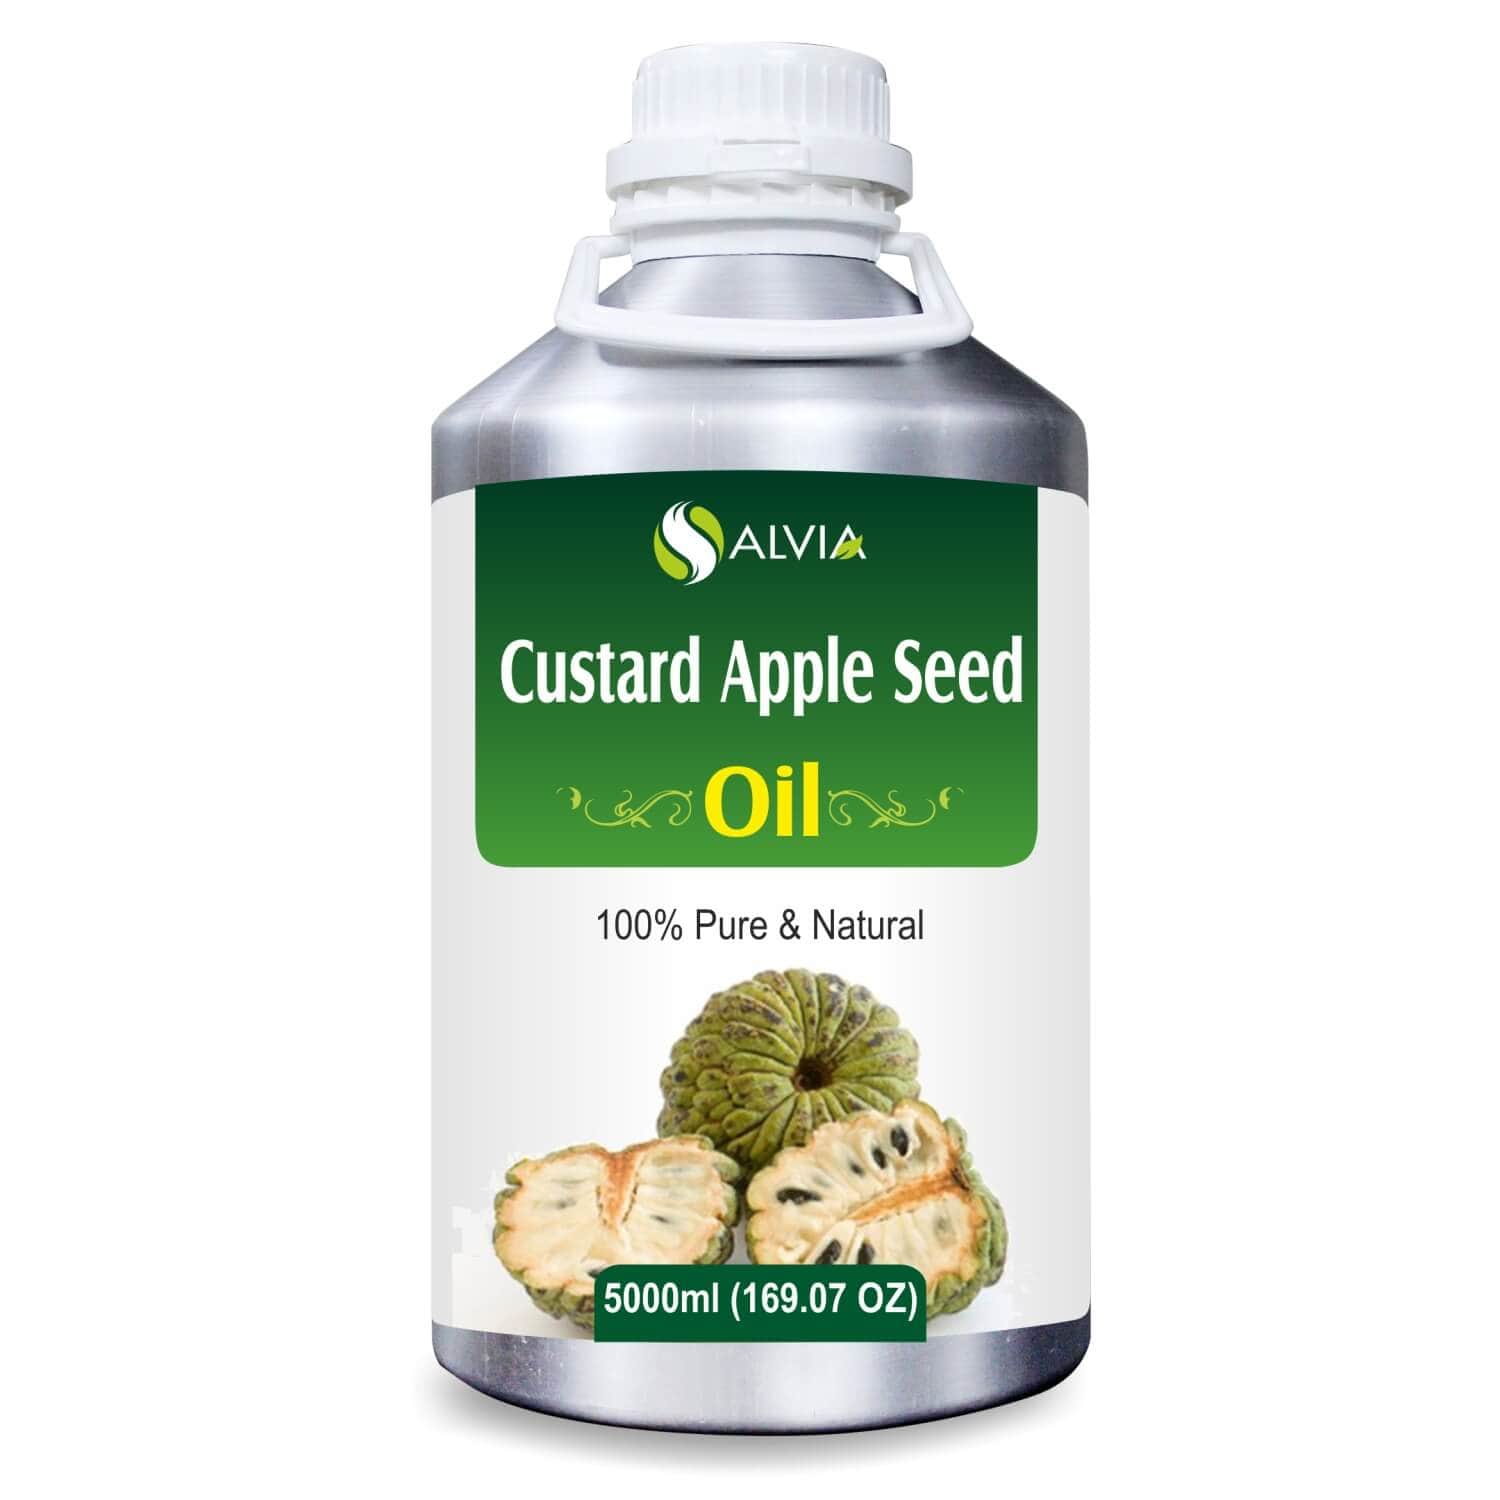 Salvia Natural Carrier Oils,Sun Care,Sunscreen Oil 5000ml Custard Apple Seed Oil (Annona Squamosa) Natural Pure Carrier Oil Undiluted Prevents Premature Ageing & Greying, Heals Skin Issues, Reduces Acne